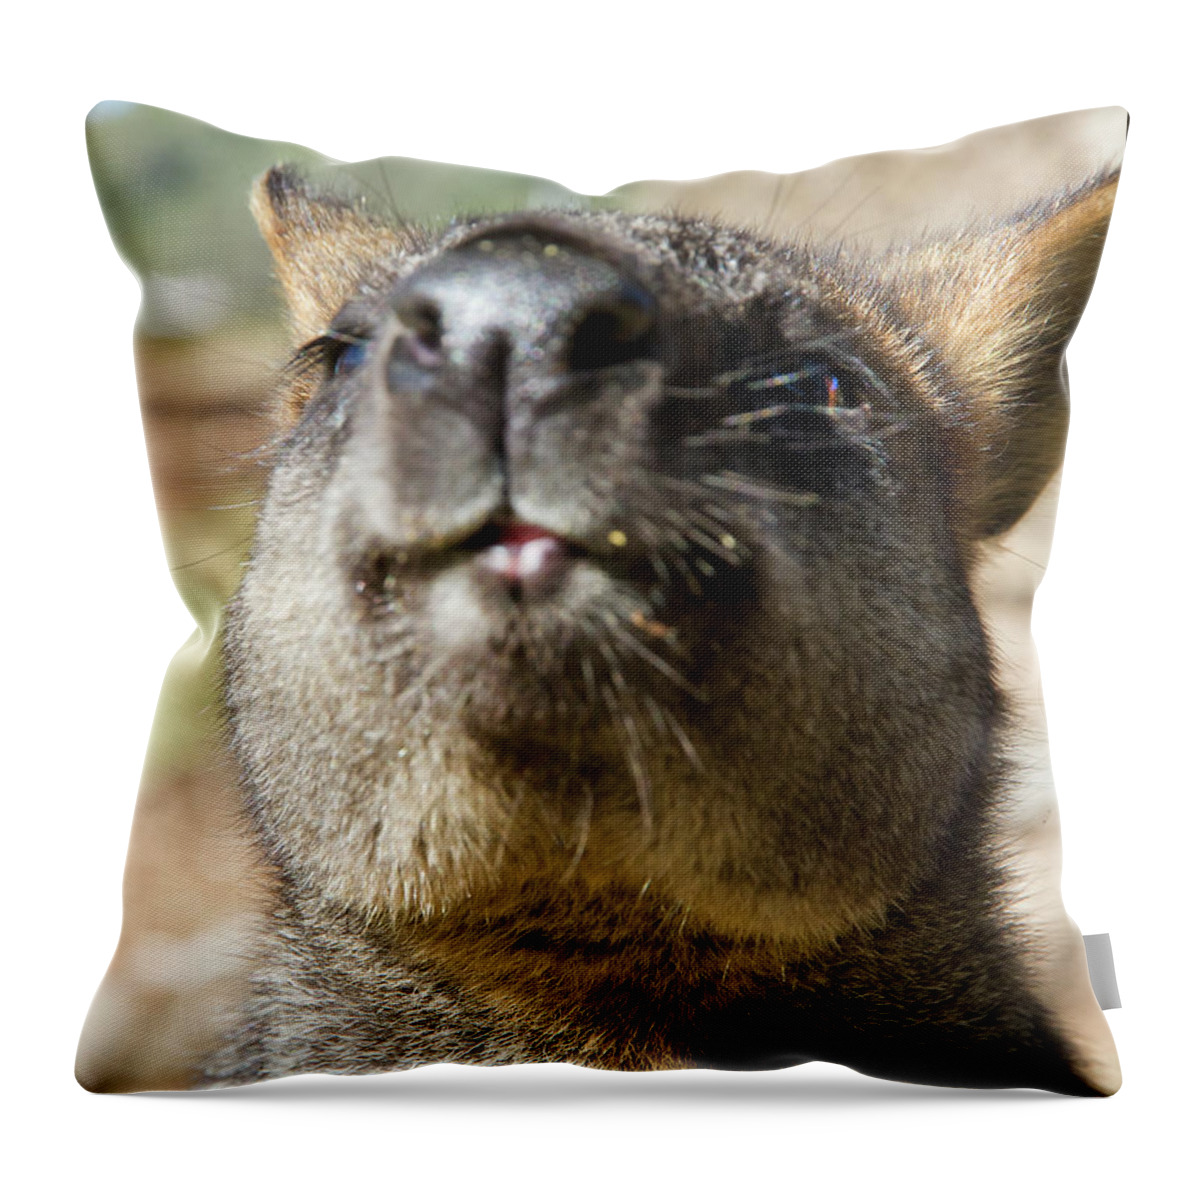 Swamp Throw Pillow featuring the photograph Wiggling His Nose At My Camera by Miroslava Jurcik